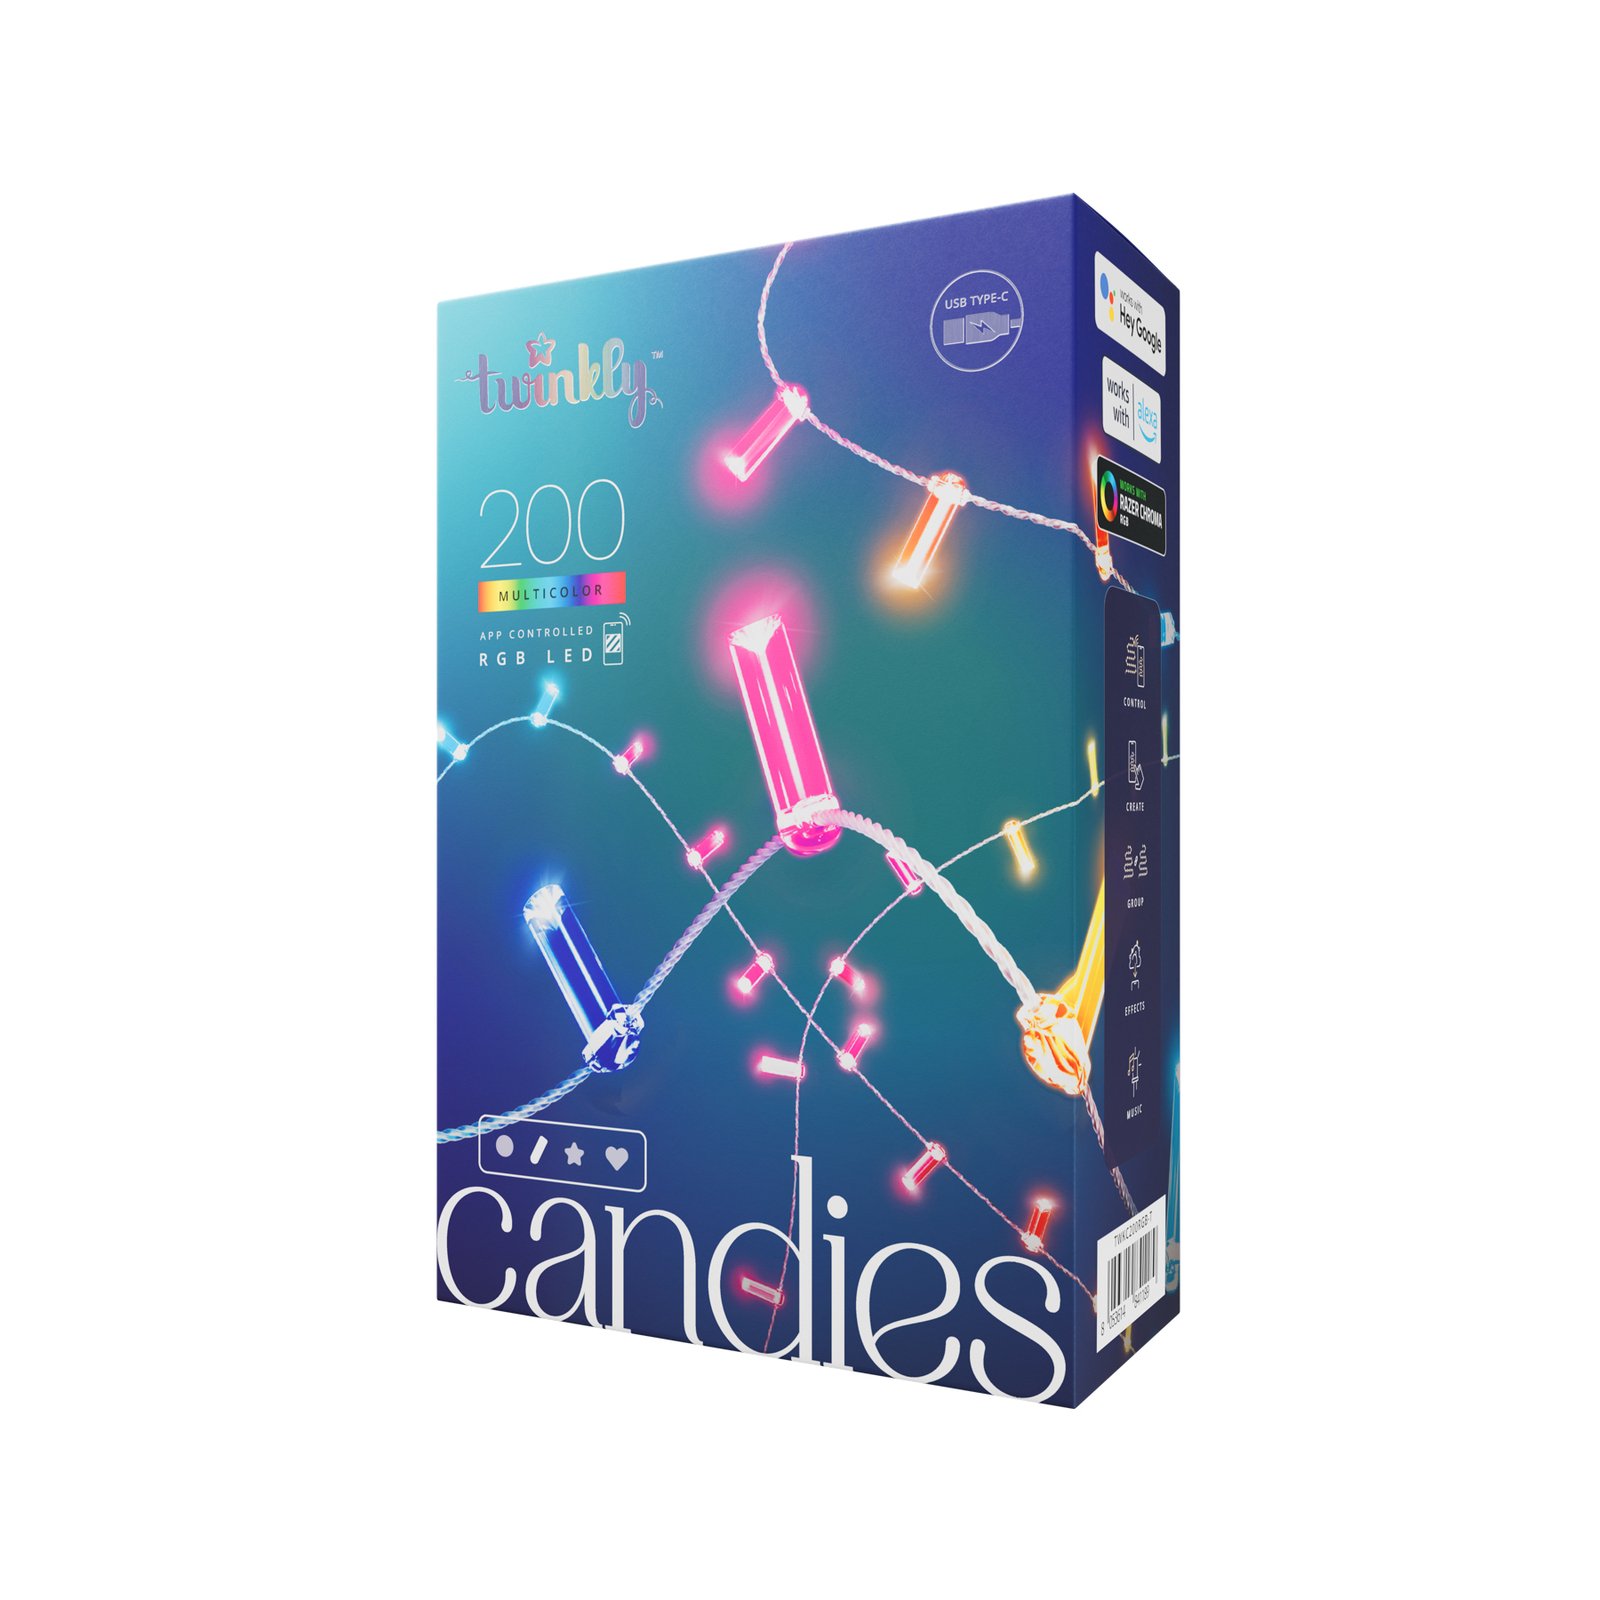 Twinkly Candies, 200 velas Smart cable claro 12m